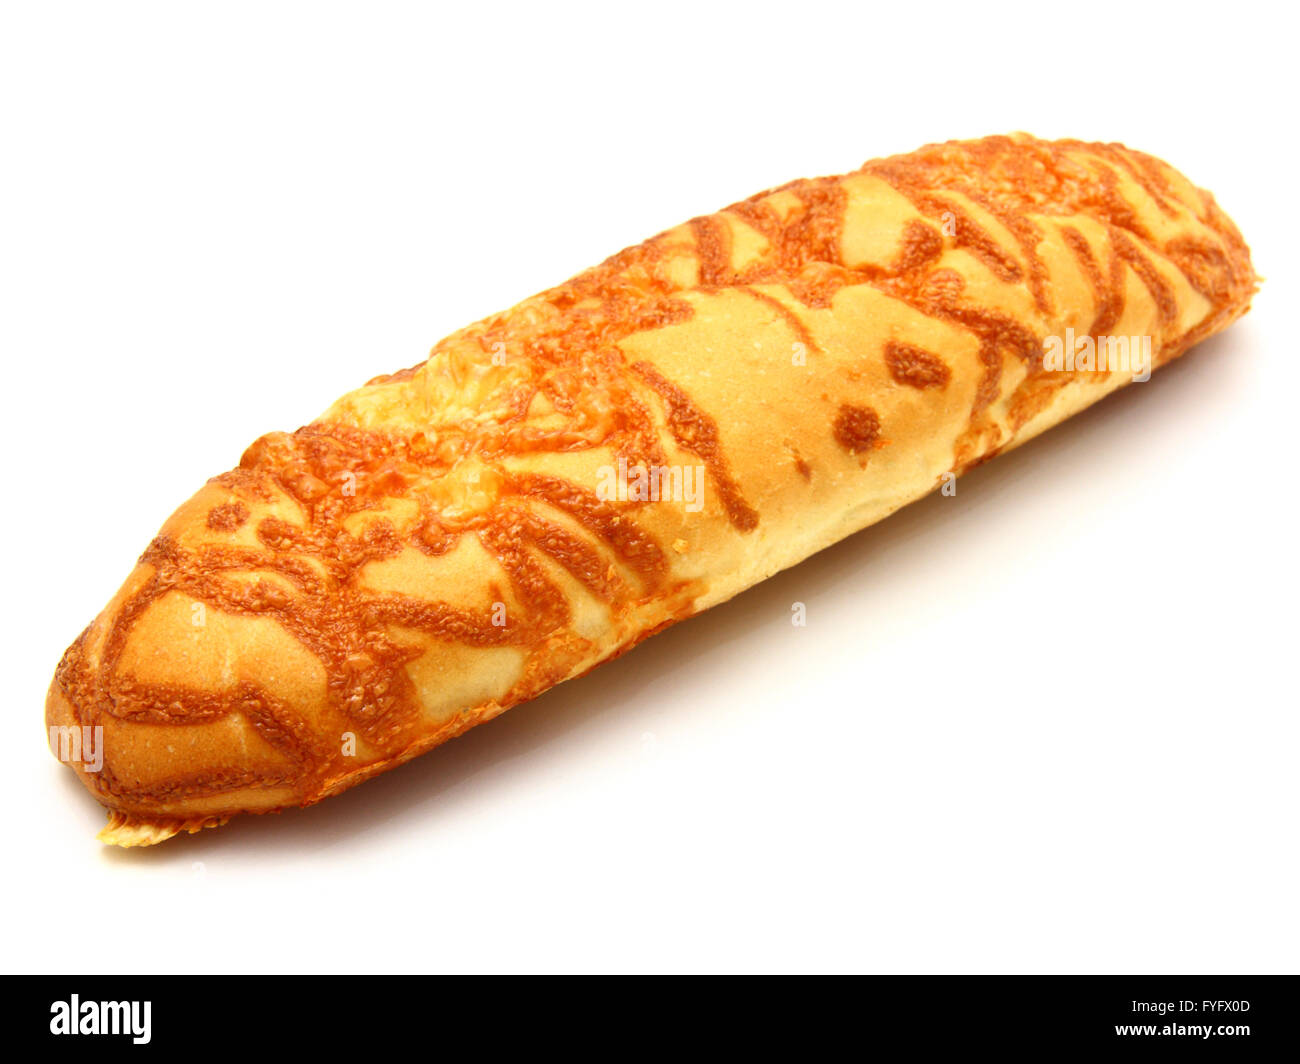 The ruddy long loaf of bread is strewed by cheese Stock Photo